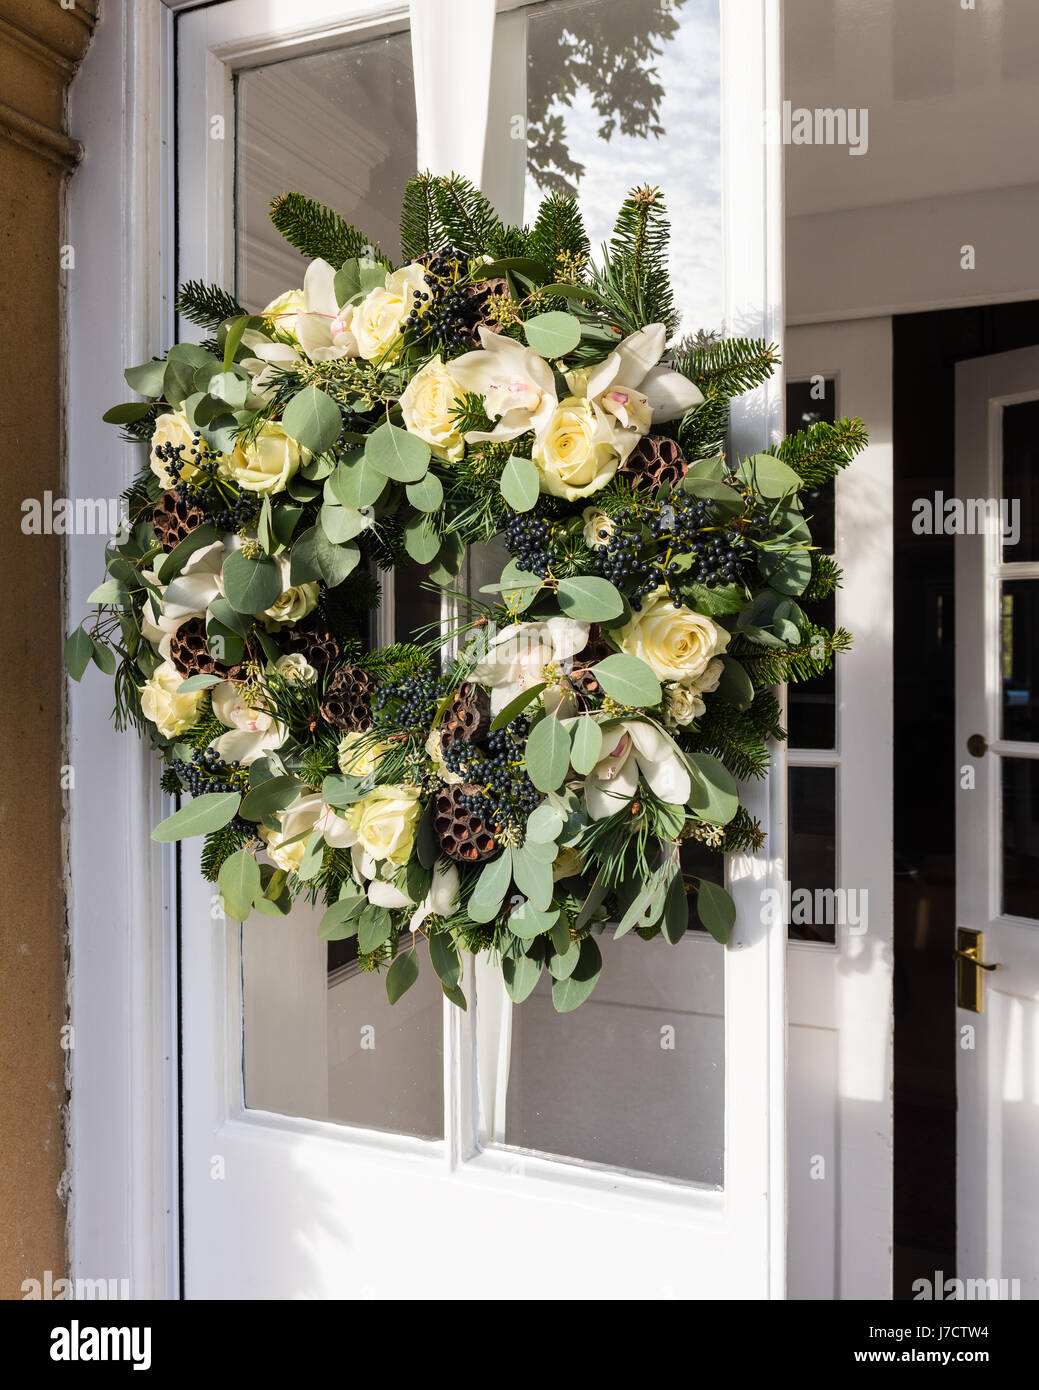 A beautiful handmade wreath from twisted willow, white roses and lotus flowers on front door Stock Photo